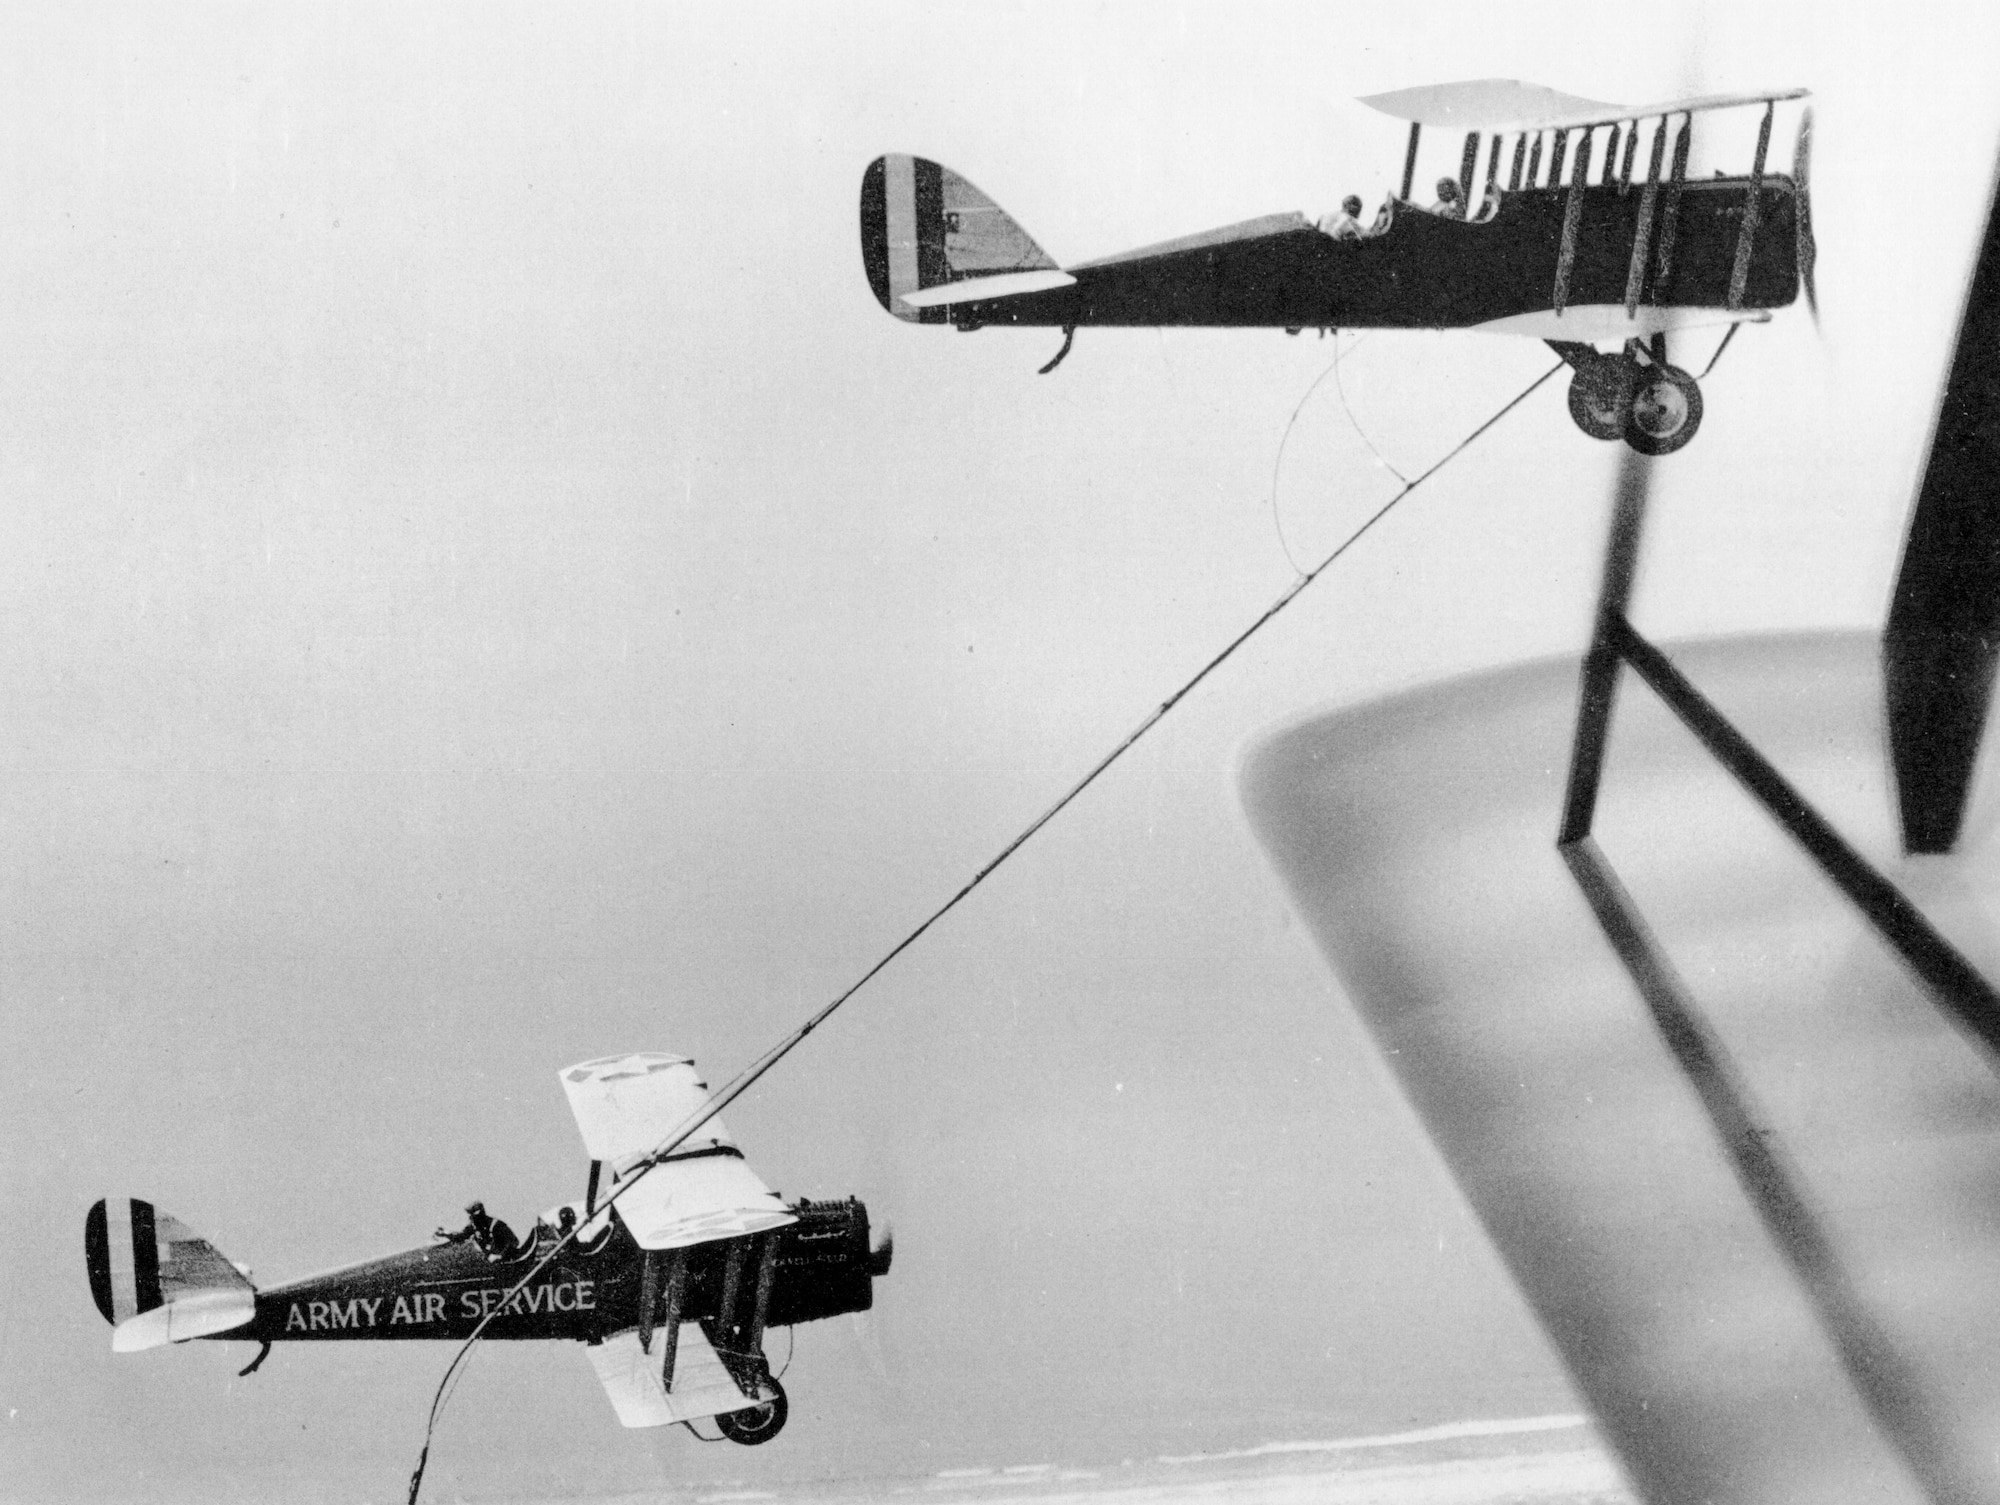 The de Havilland DH-4B tanker dangles a hose for the DH-4B receiver to grab over Rockwell Field.  In the tanker, 1st Lt. Frank W. Seifert holds the hose in the rear cockpit while the pilot, 1st Lt. Virgile Hine, is in the front.  Capt. Lowell H. Smith flew the receiver and 1st Lt. John P. Richter handled the hose.